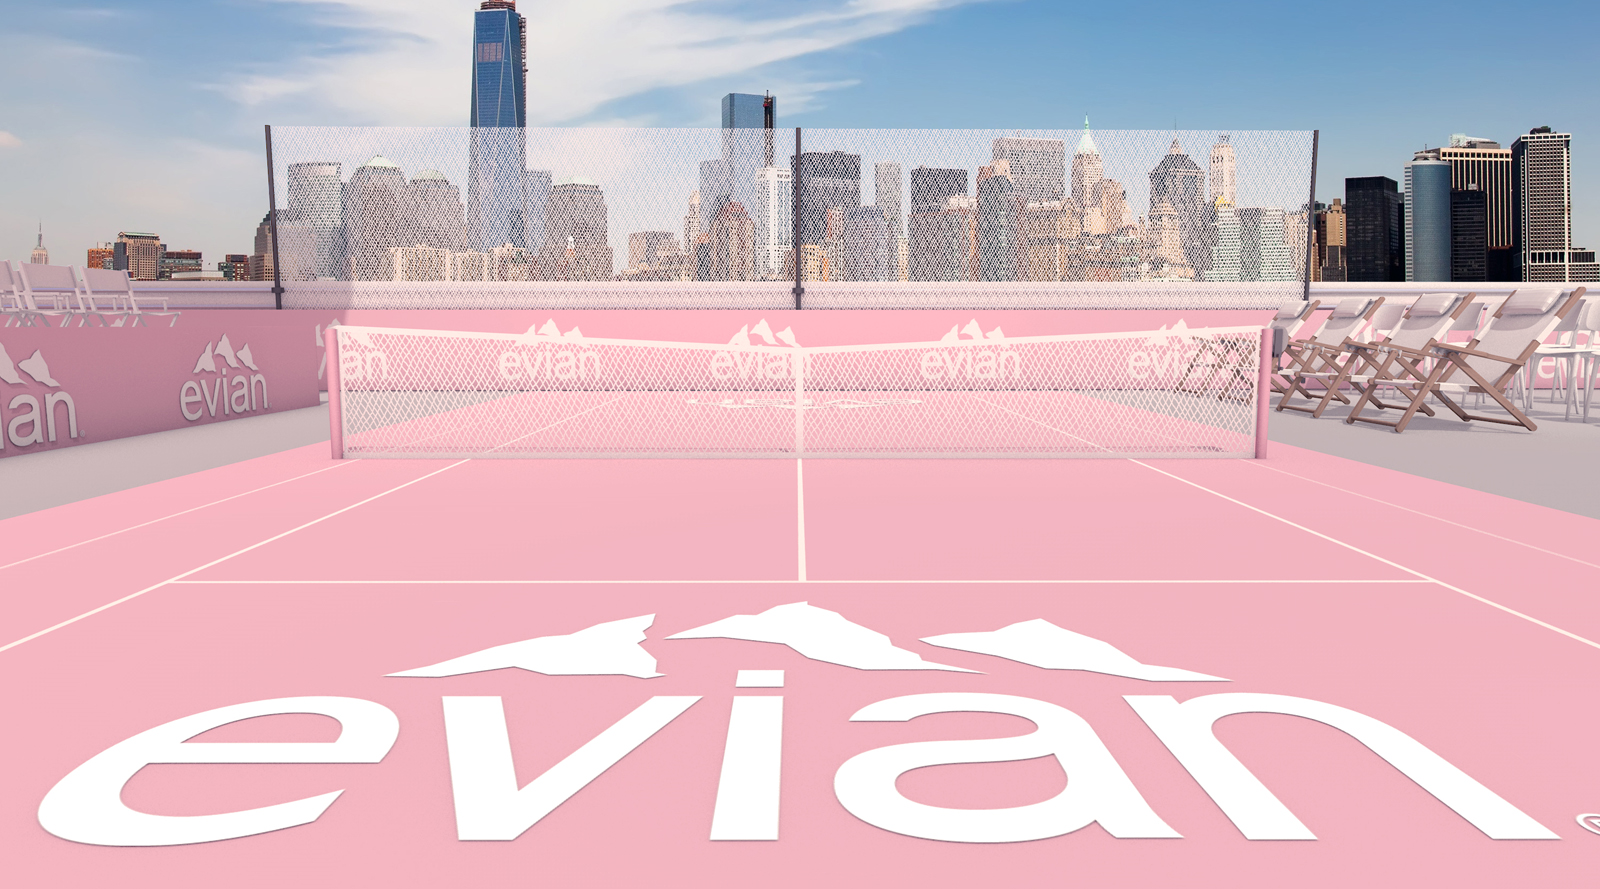 All Aboard the SS evian! A First-of-its-Kind US Open Waterside Finals Experience with evian®, the Official Water of the US Open